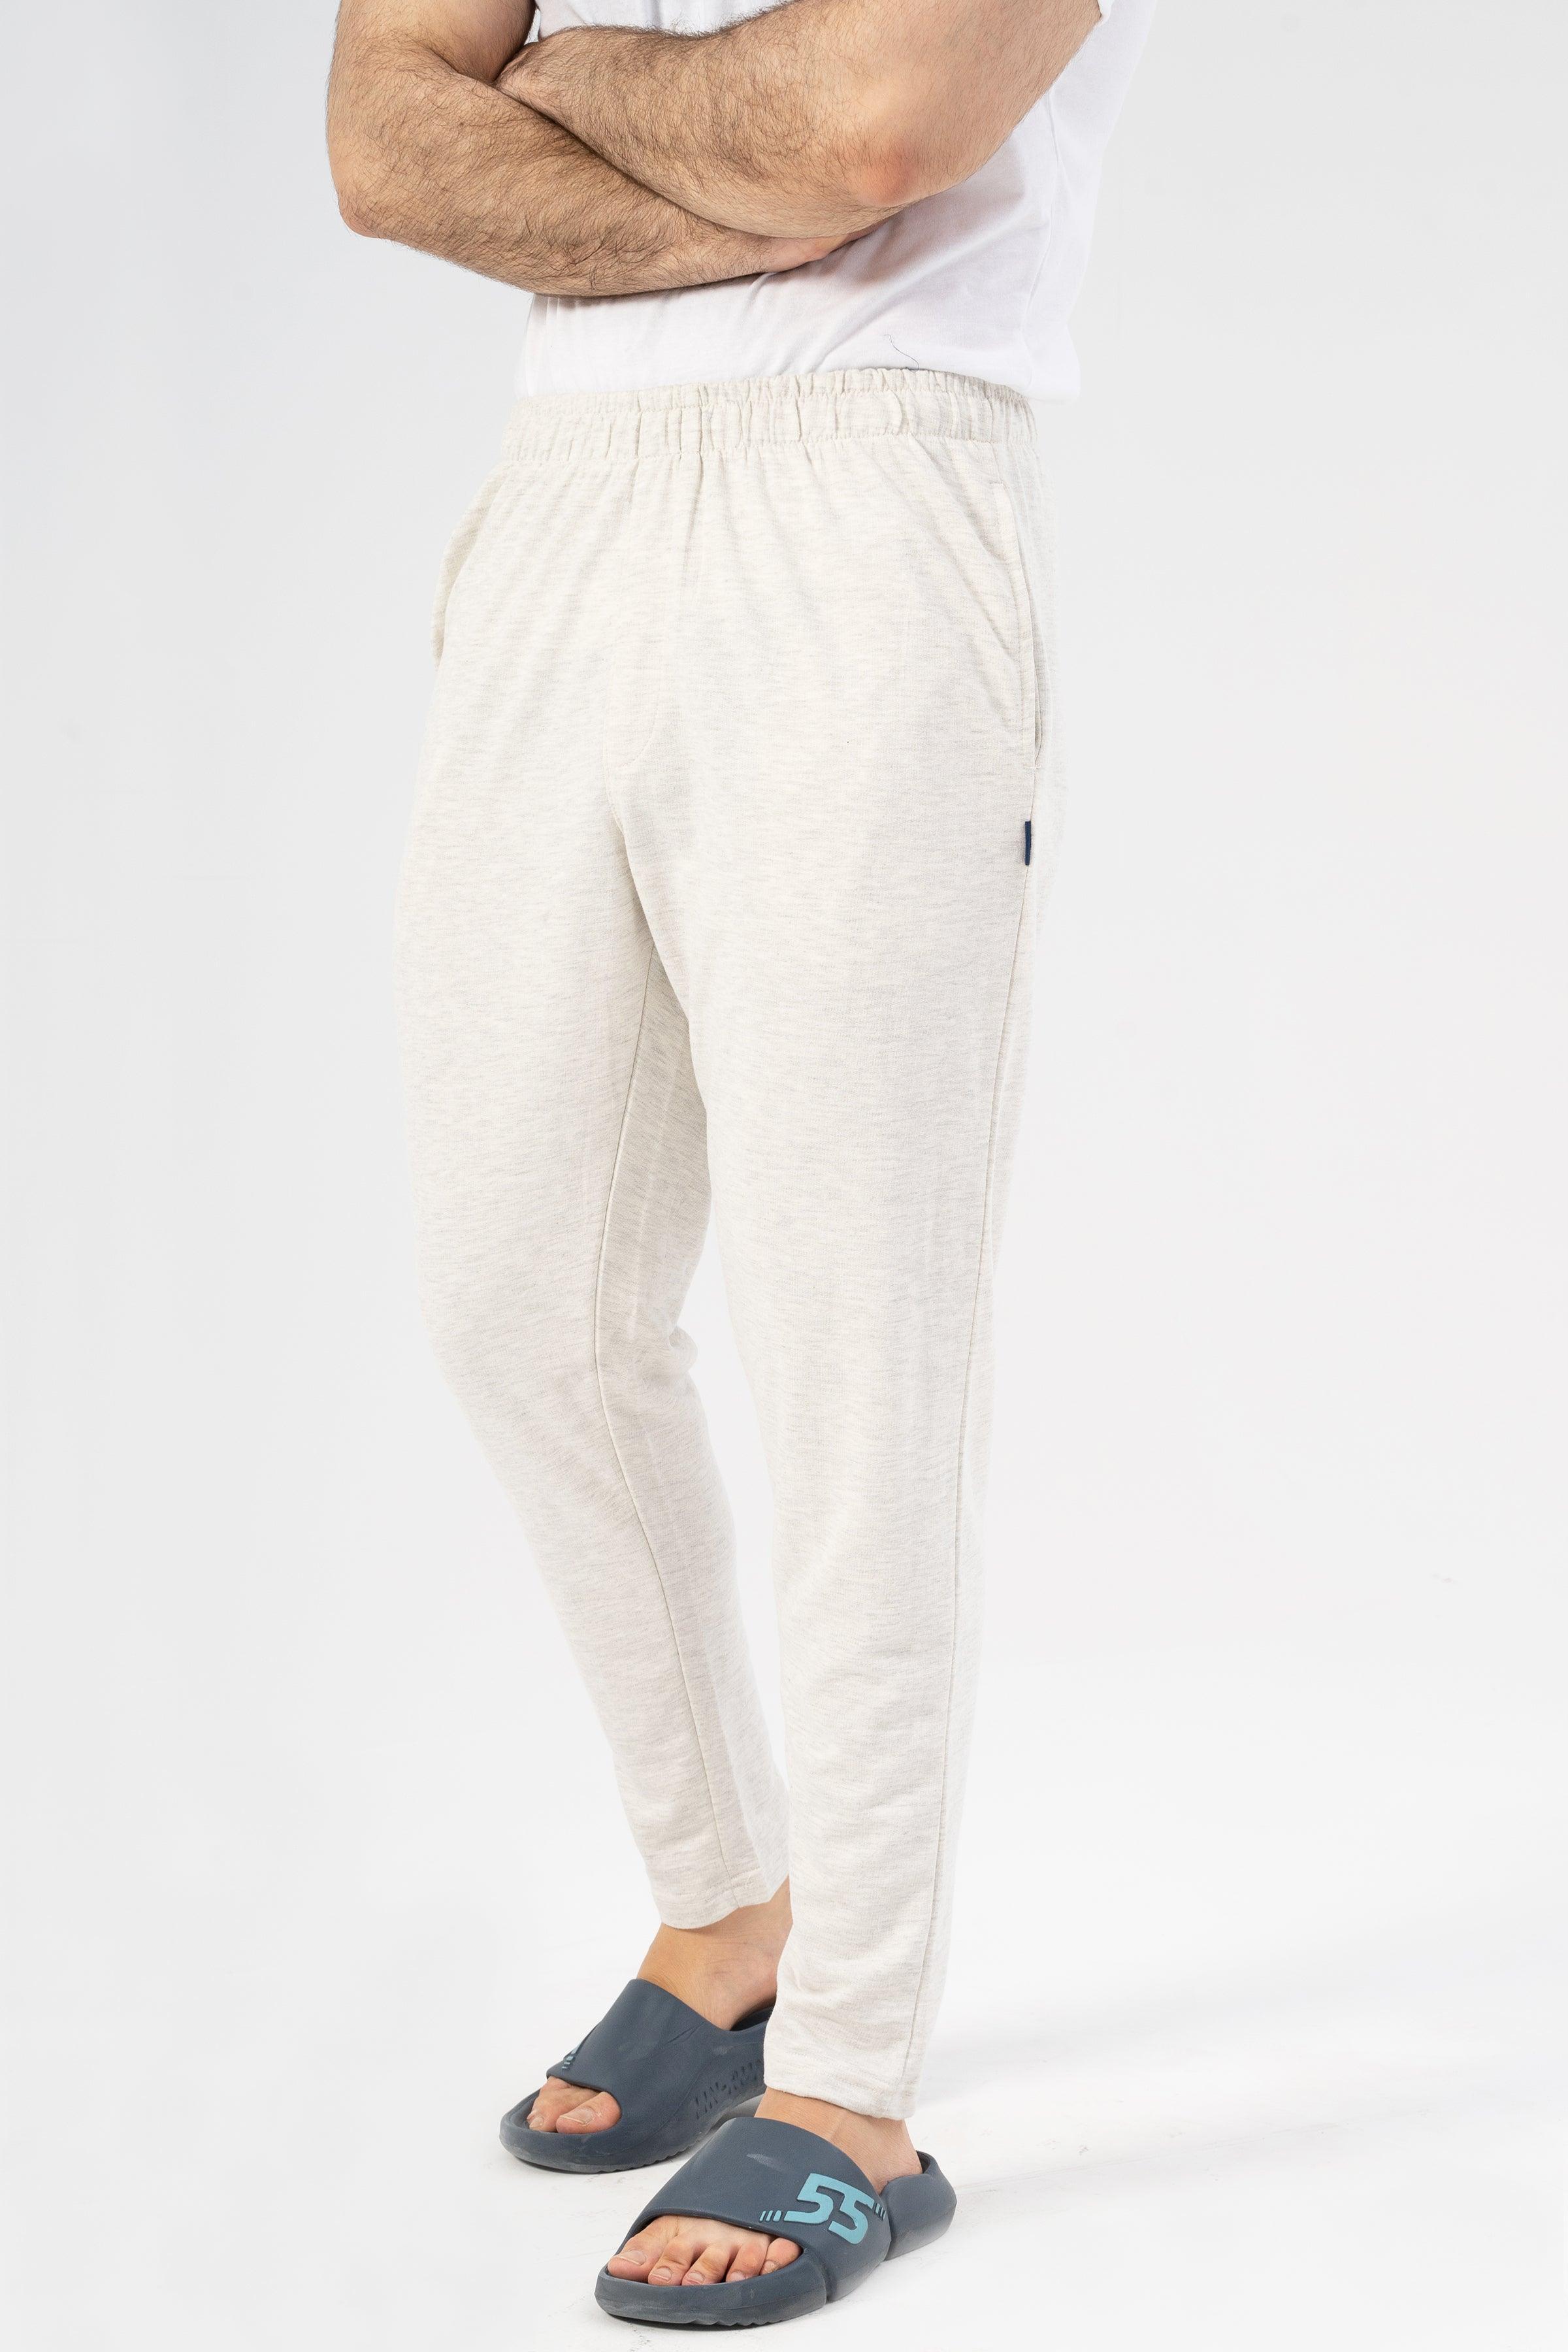 ULTIMATE COMFORT SLEEPWEAR PANT OATMEAL at Charcoal Clothing